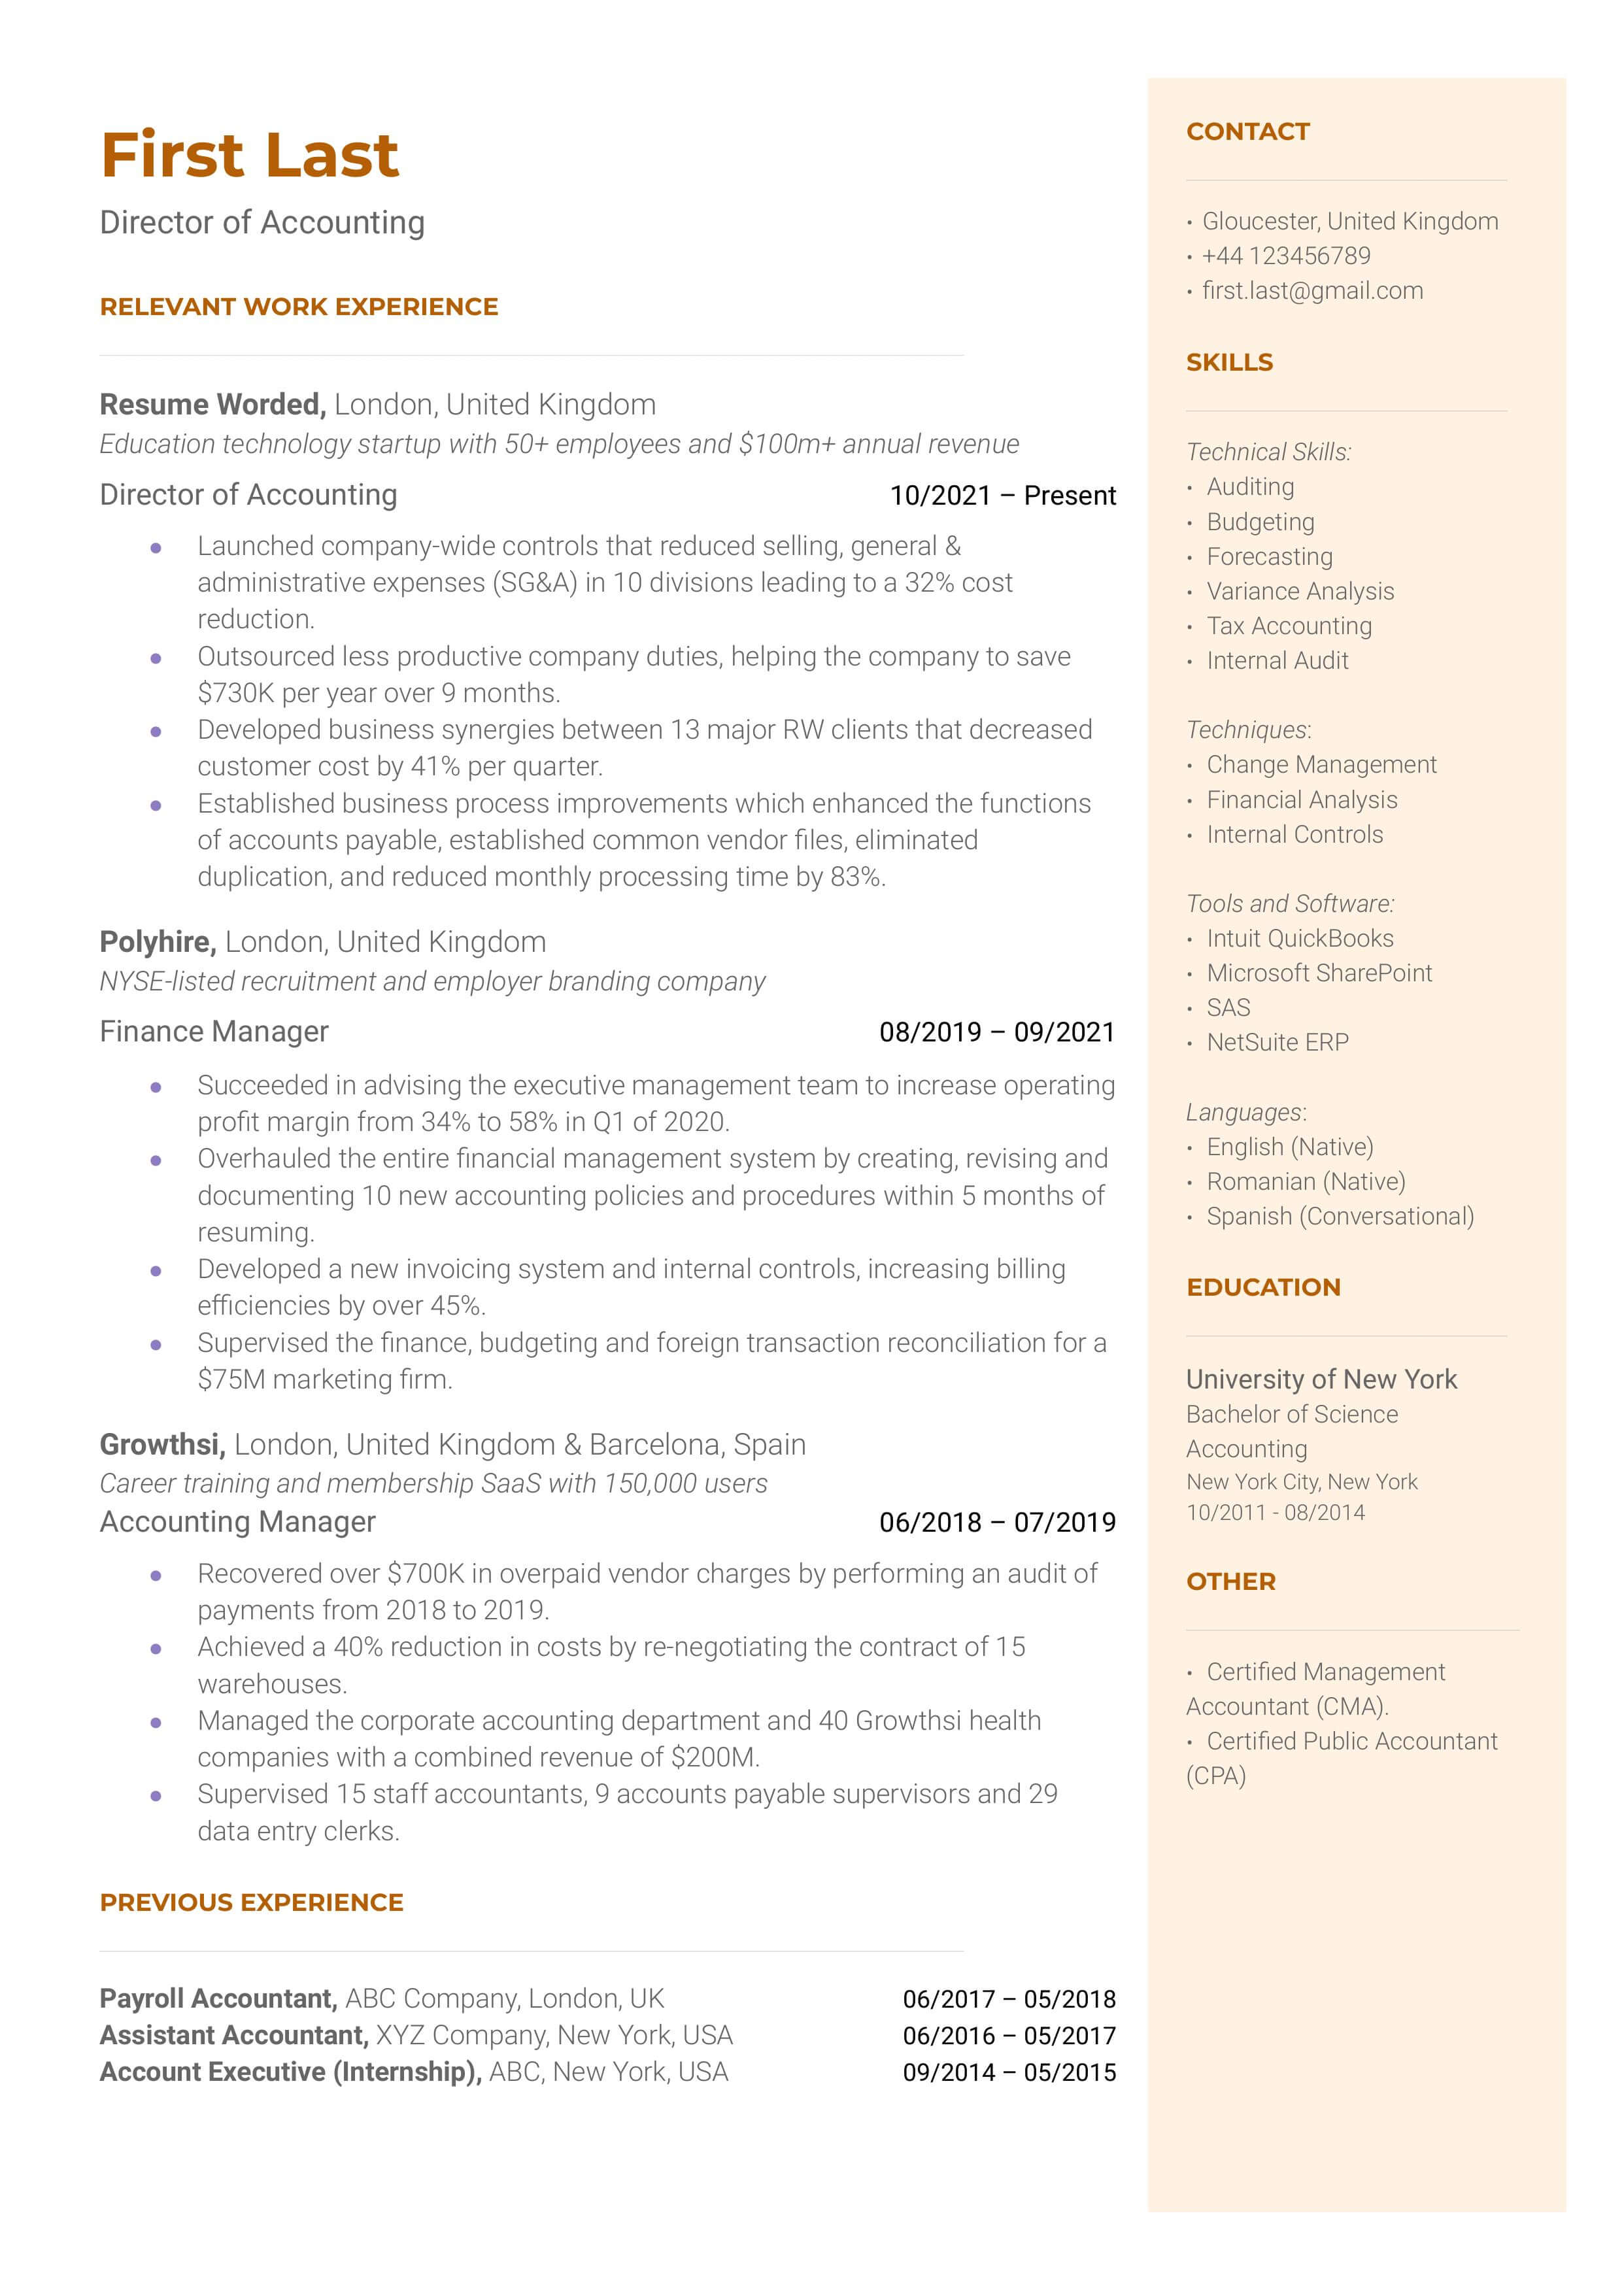 A resume screenshot displaying strategic financial planning skills and proficiency in financial technology.